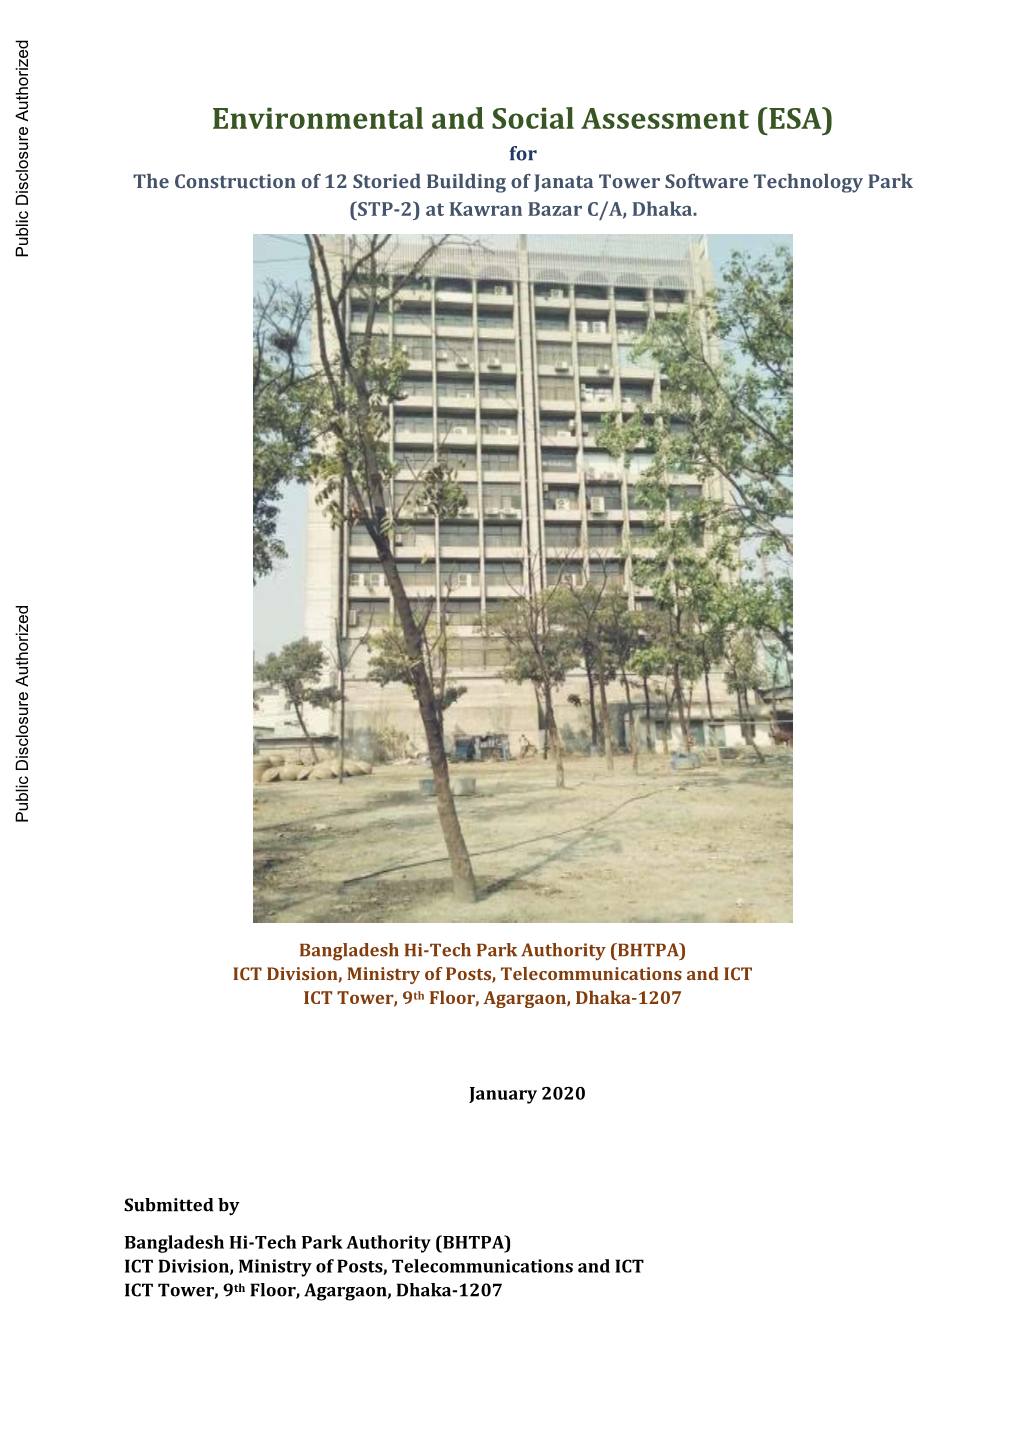 Environmental and Social Assessment (ESA) for the Construction of 12 Storied Building of Janata Tower Software Technology Park (STP-2) at Kawran Bazar C/A, Dhaka